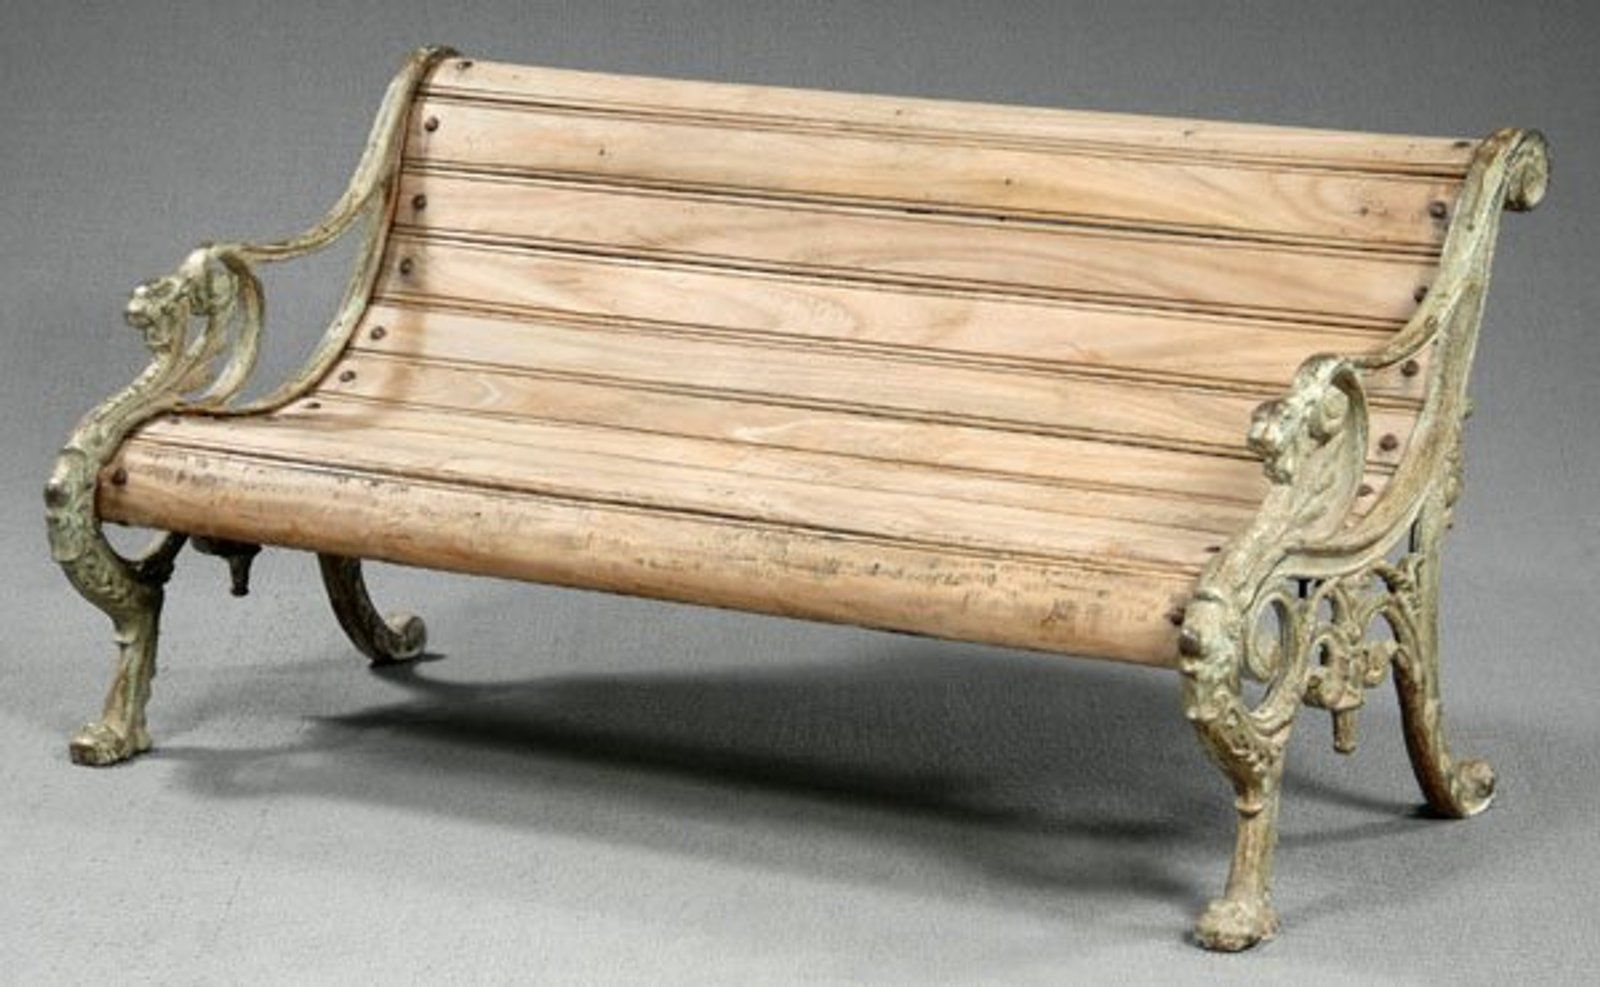 Distressed French Country Garden Bench